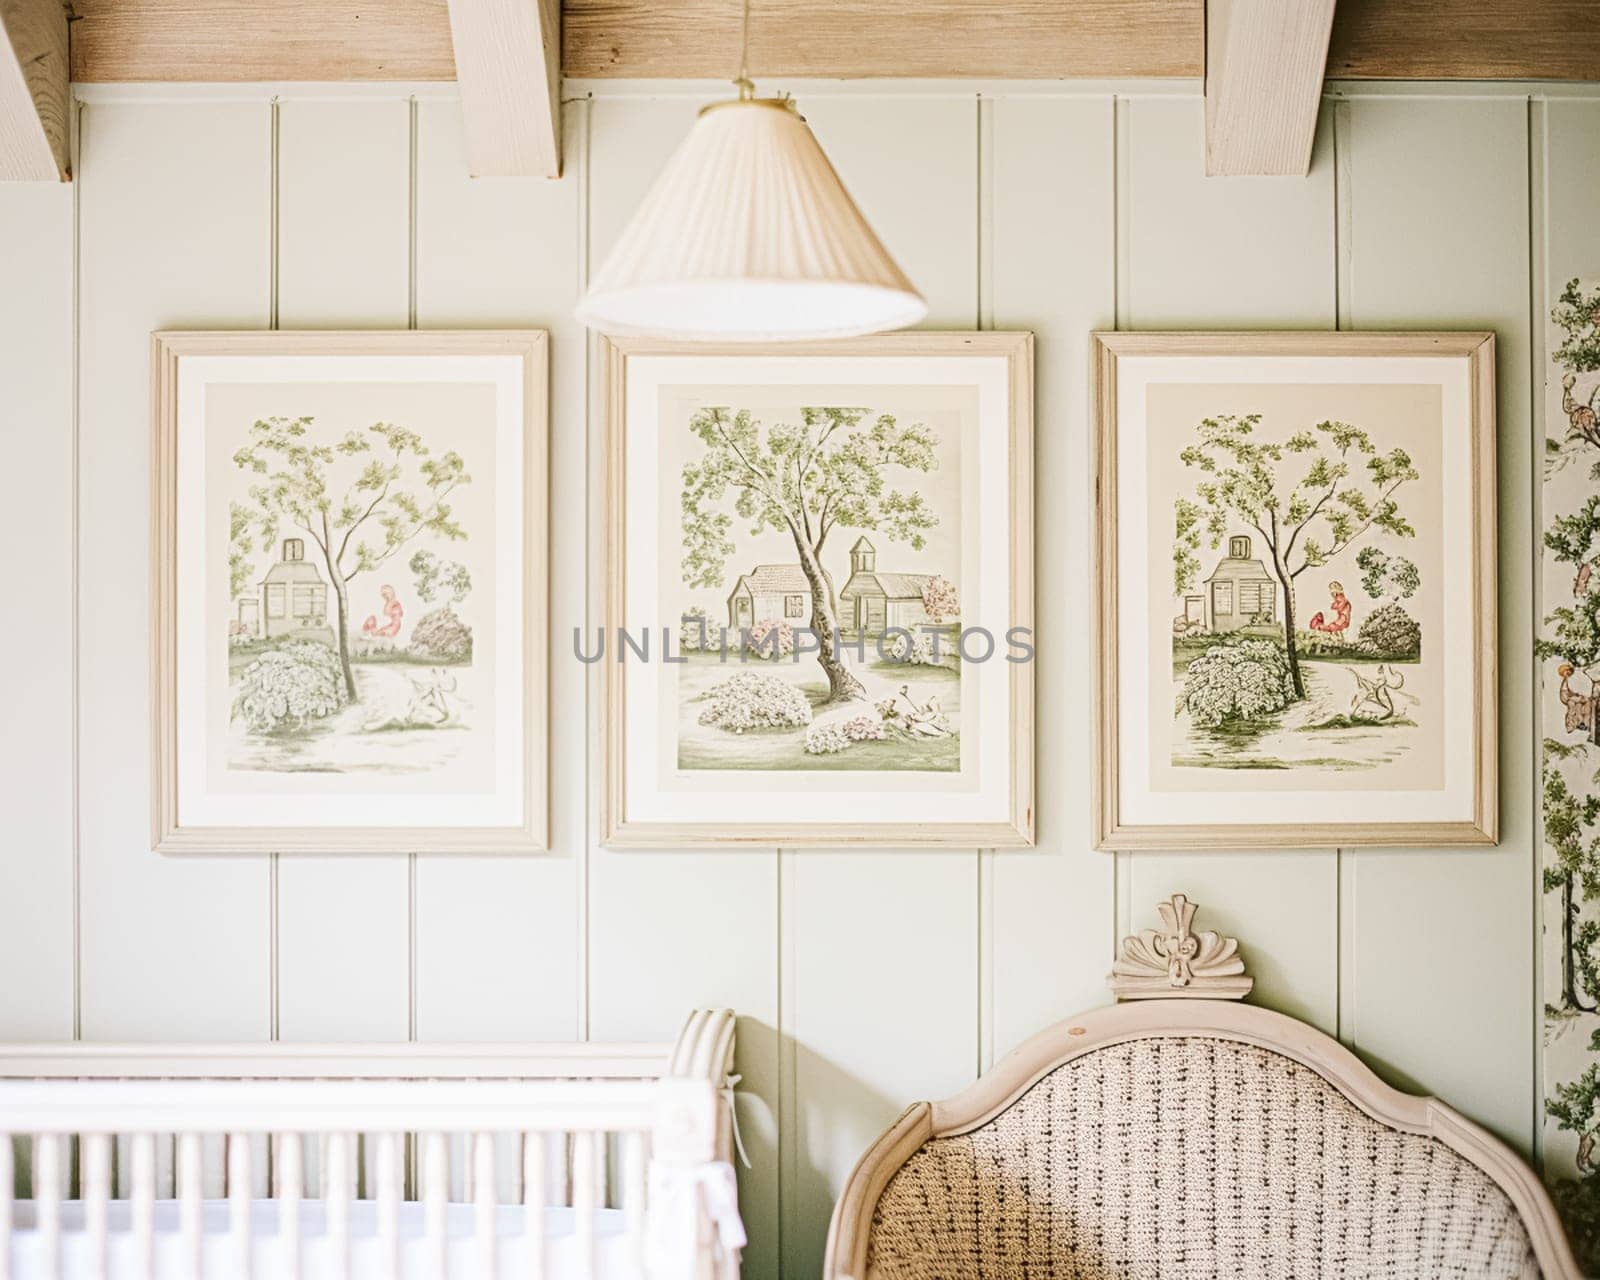 Cottage nursery framed art decor, interior design and children home decor, baby room gallery wall and country furniture, English countryside house style interiors